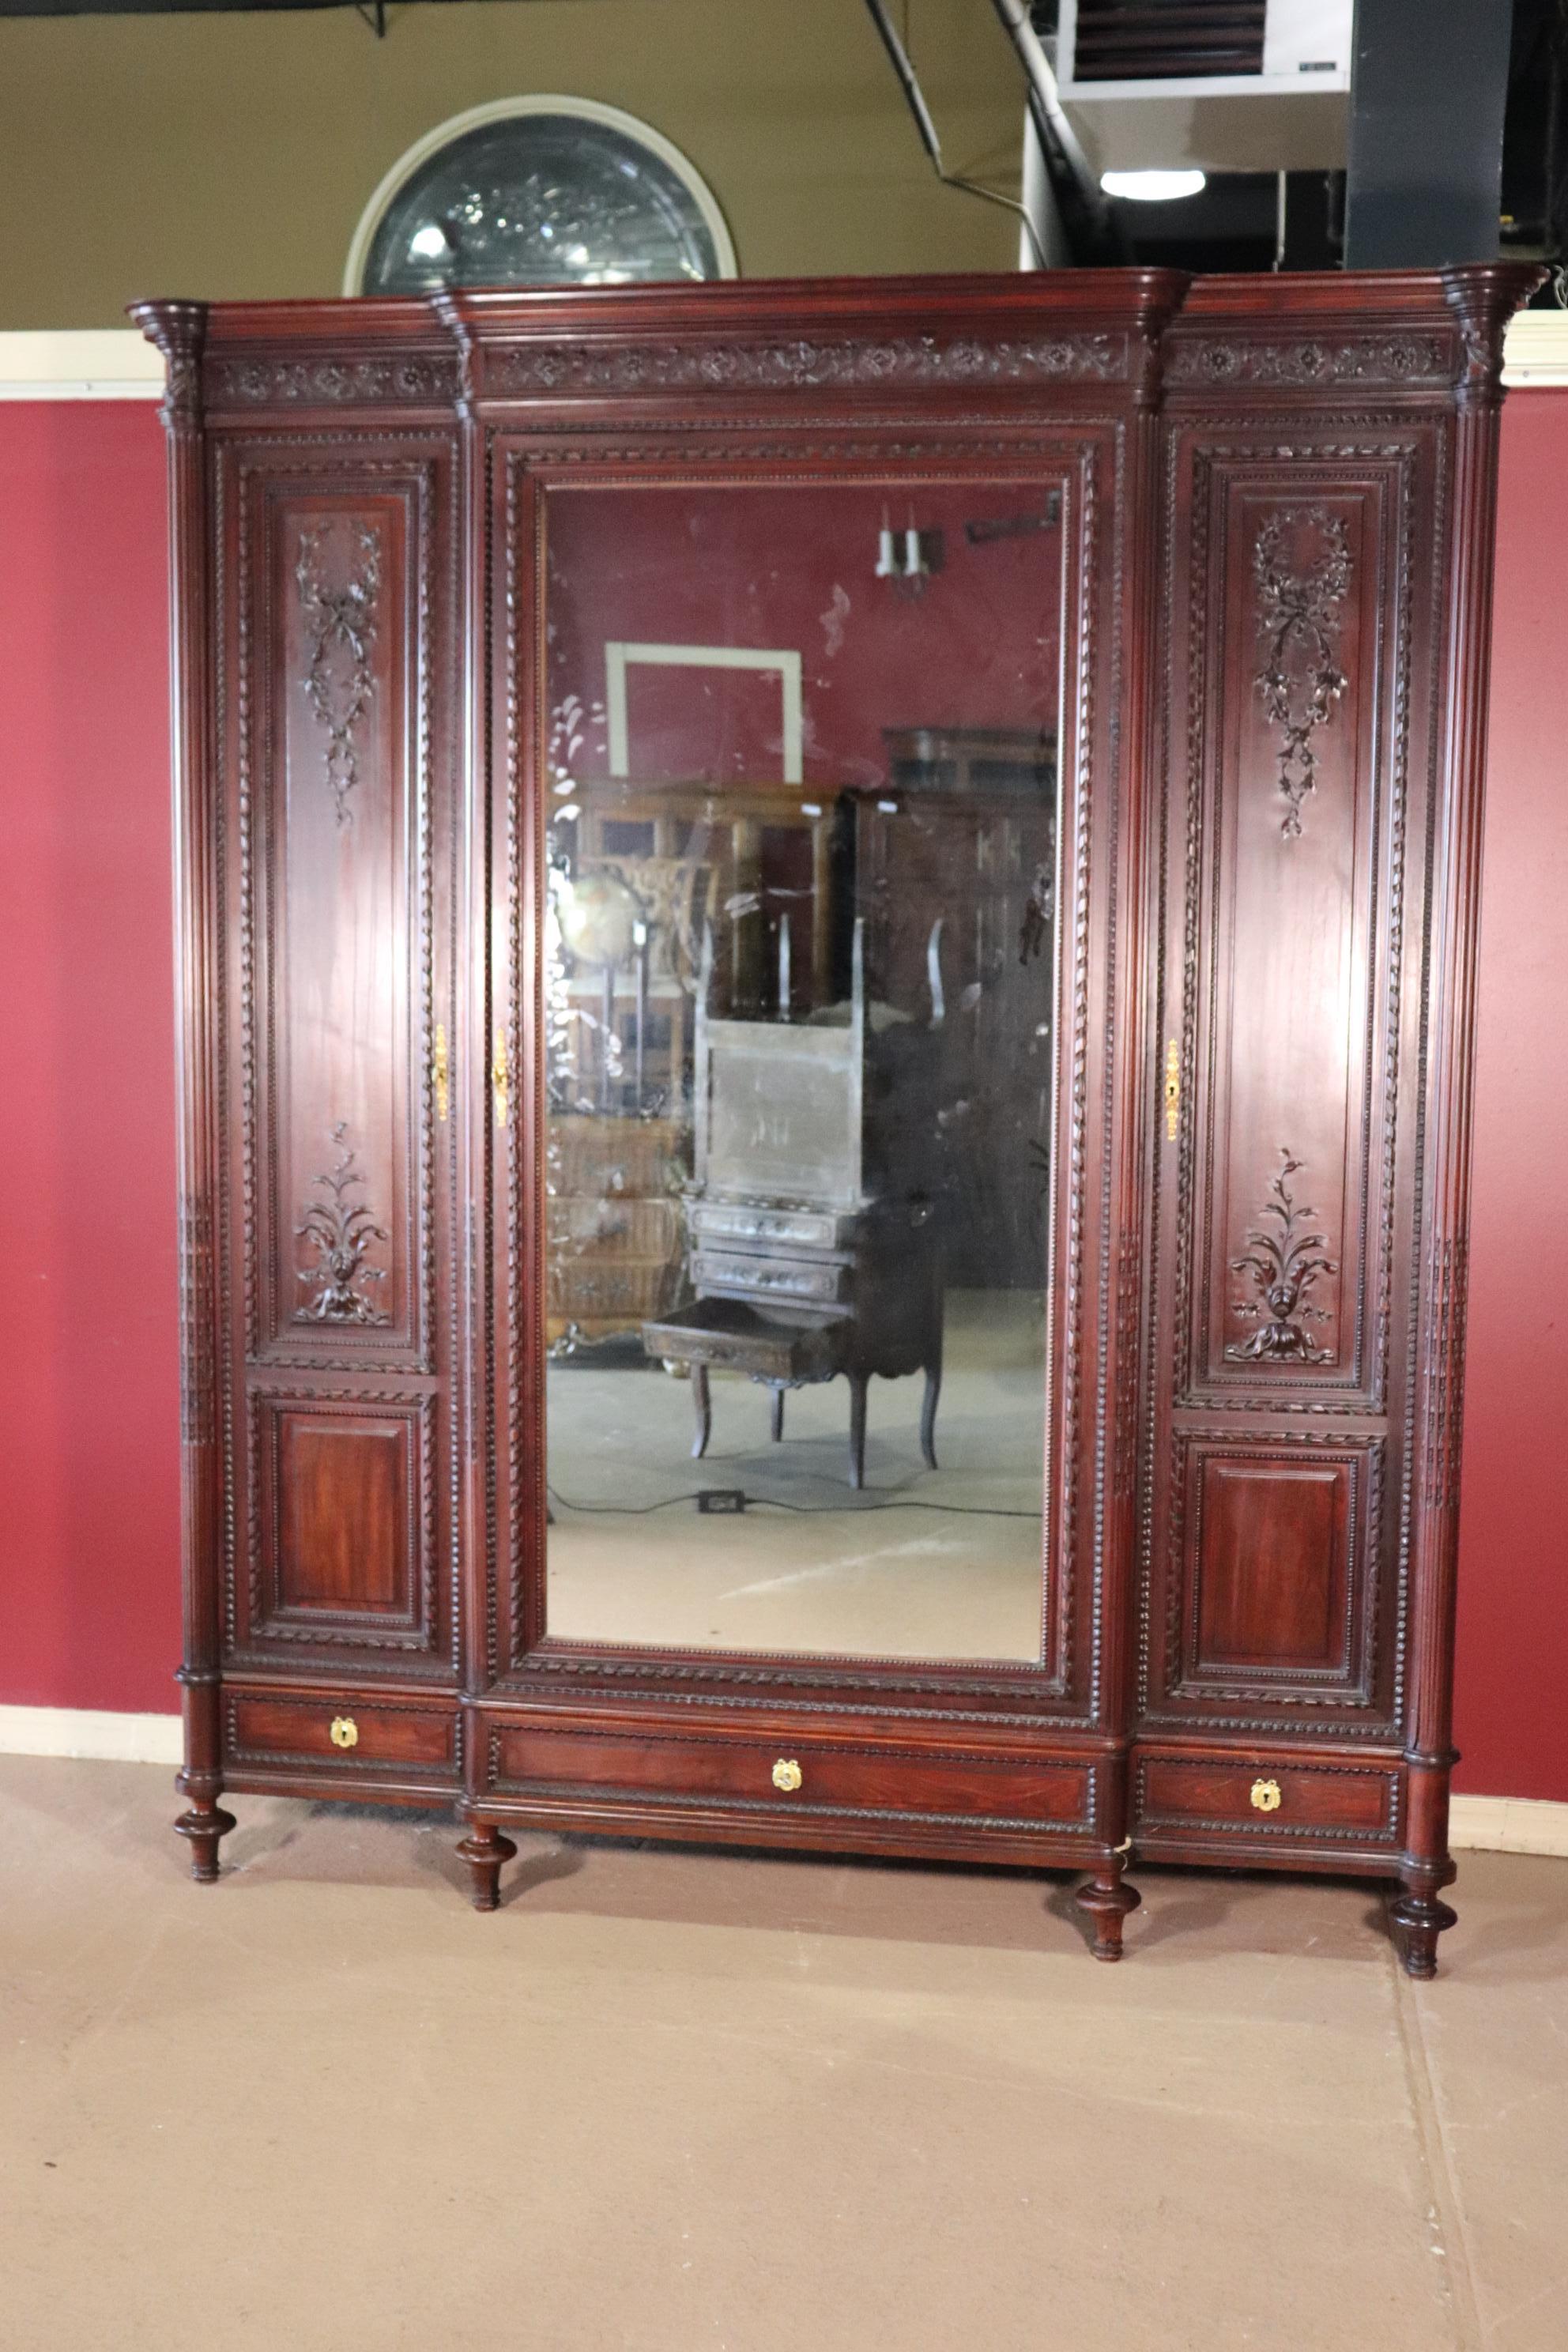 This is a beautiful carved mahogany armoire. The armoire features its original finish and has gold dore bronze hardware. The mirror is clear too. The armoire measures 95 tall x 85 wide x 20 deep.